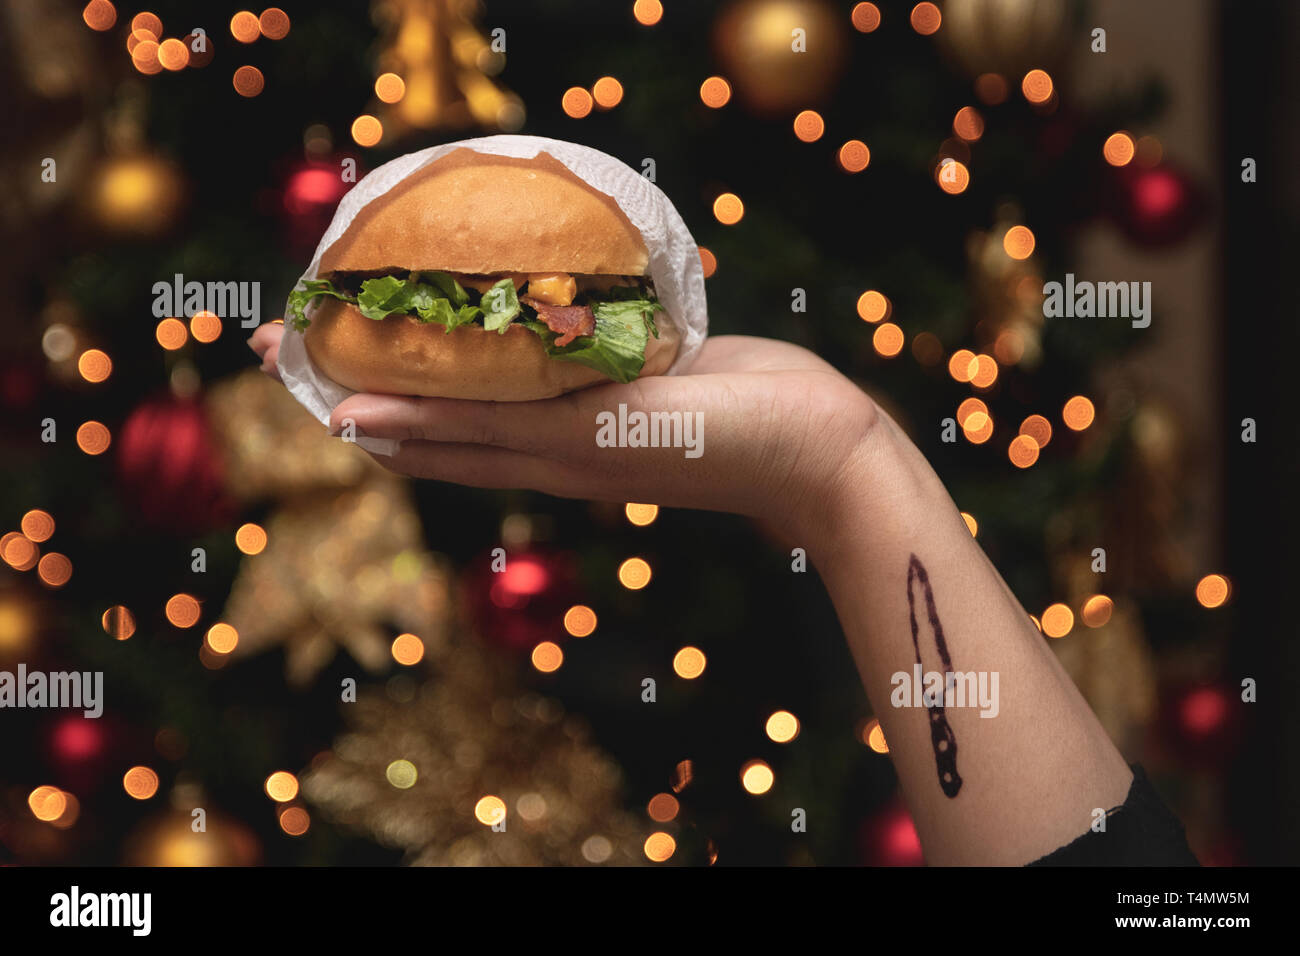 hand holding a burger with christmas background Stock Photo